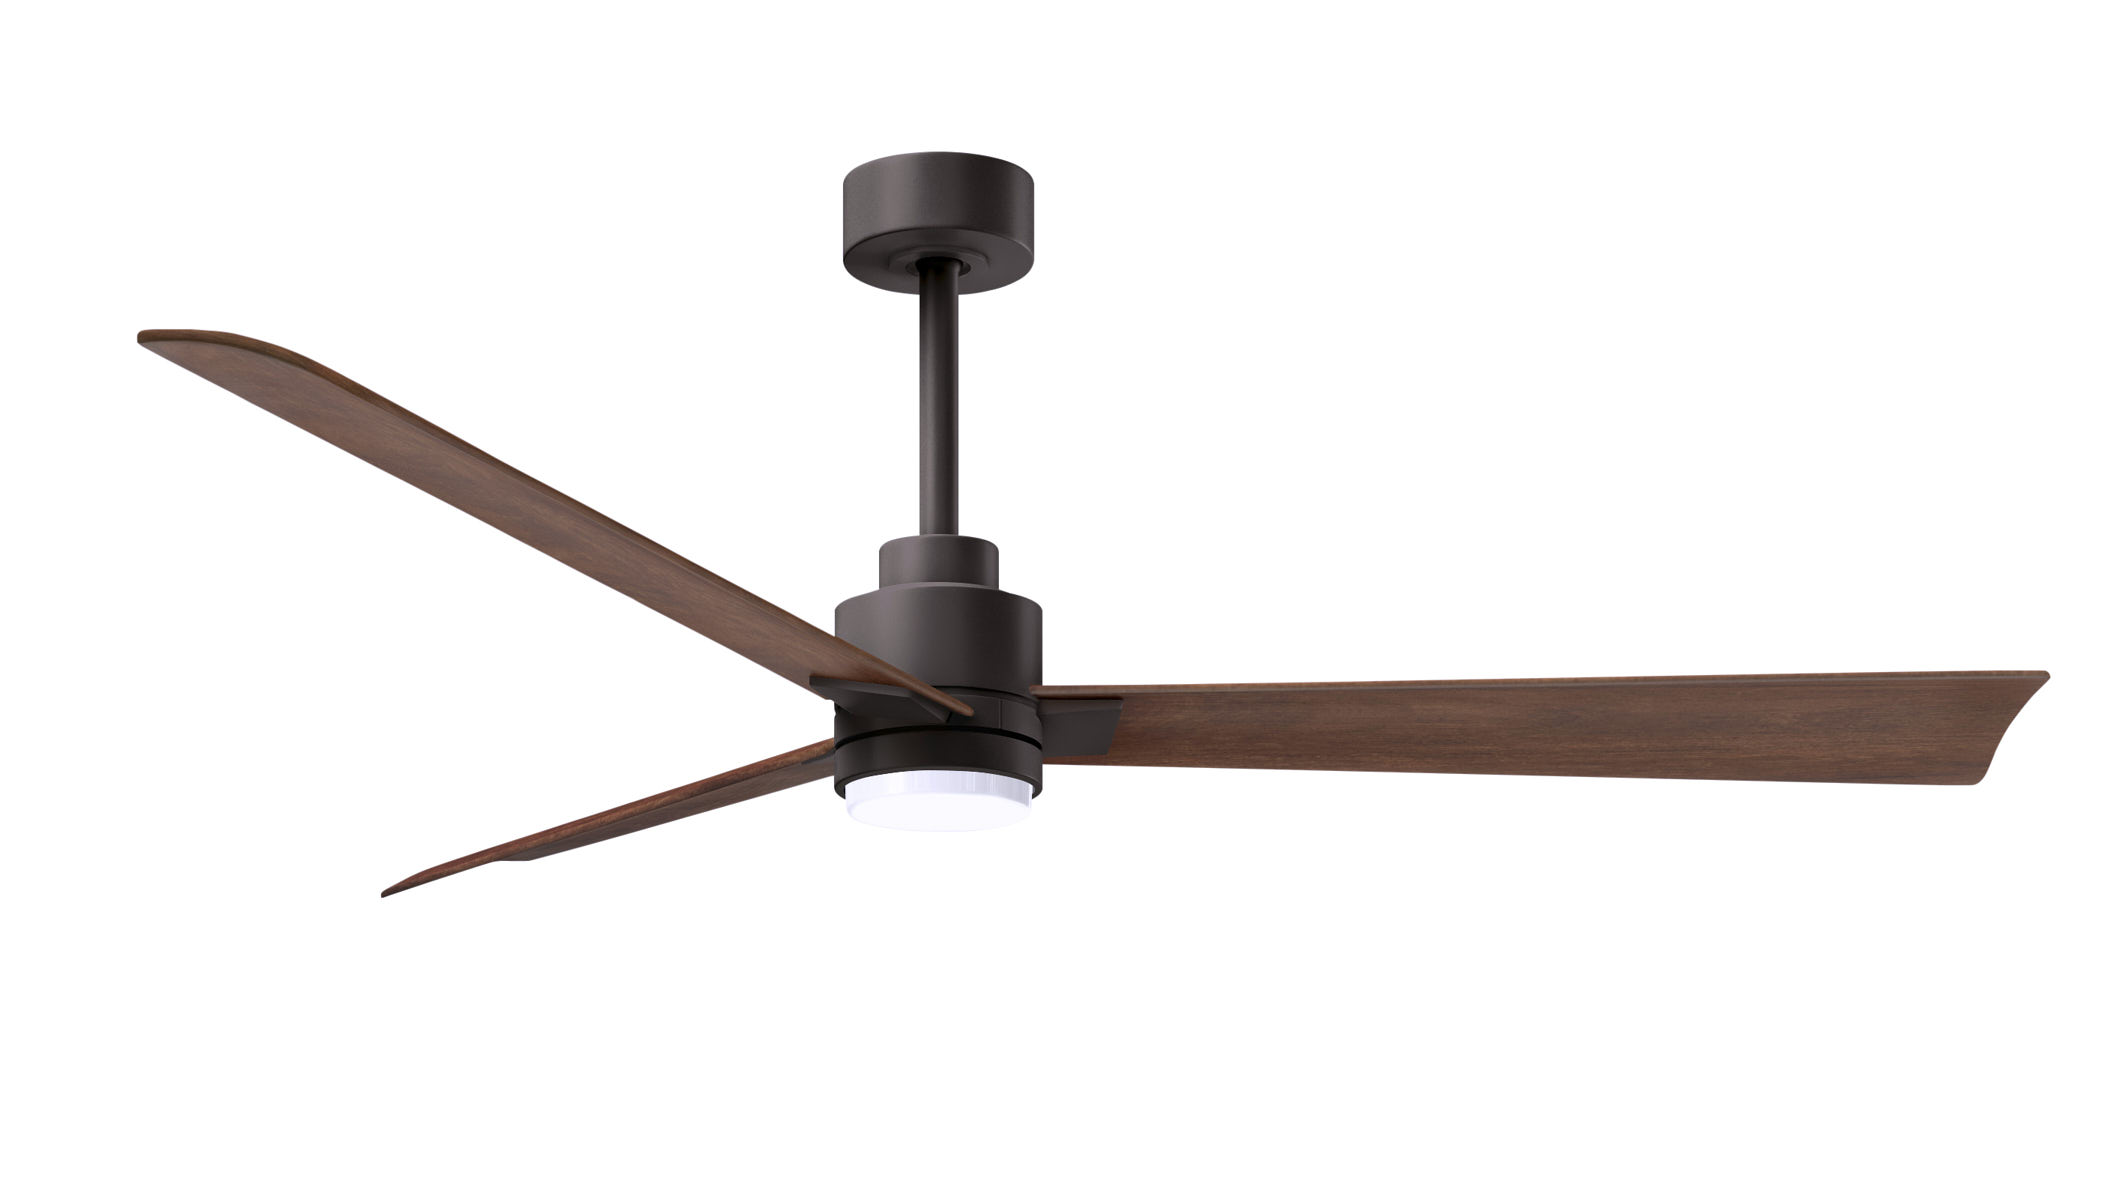 Alessandra-LK ceiling fan in textured bronze finish with 56